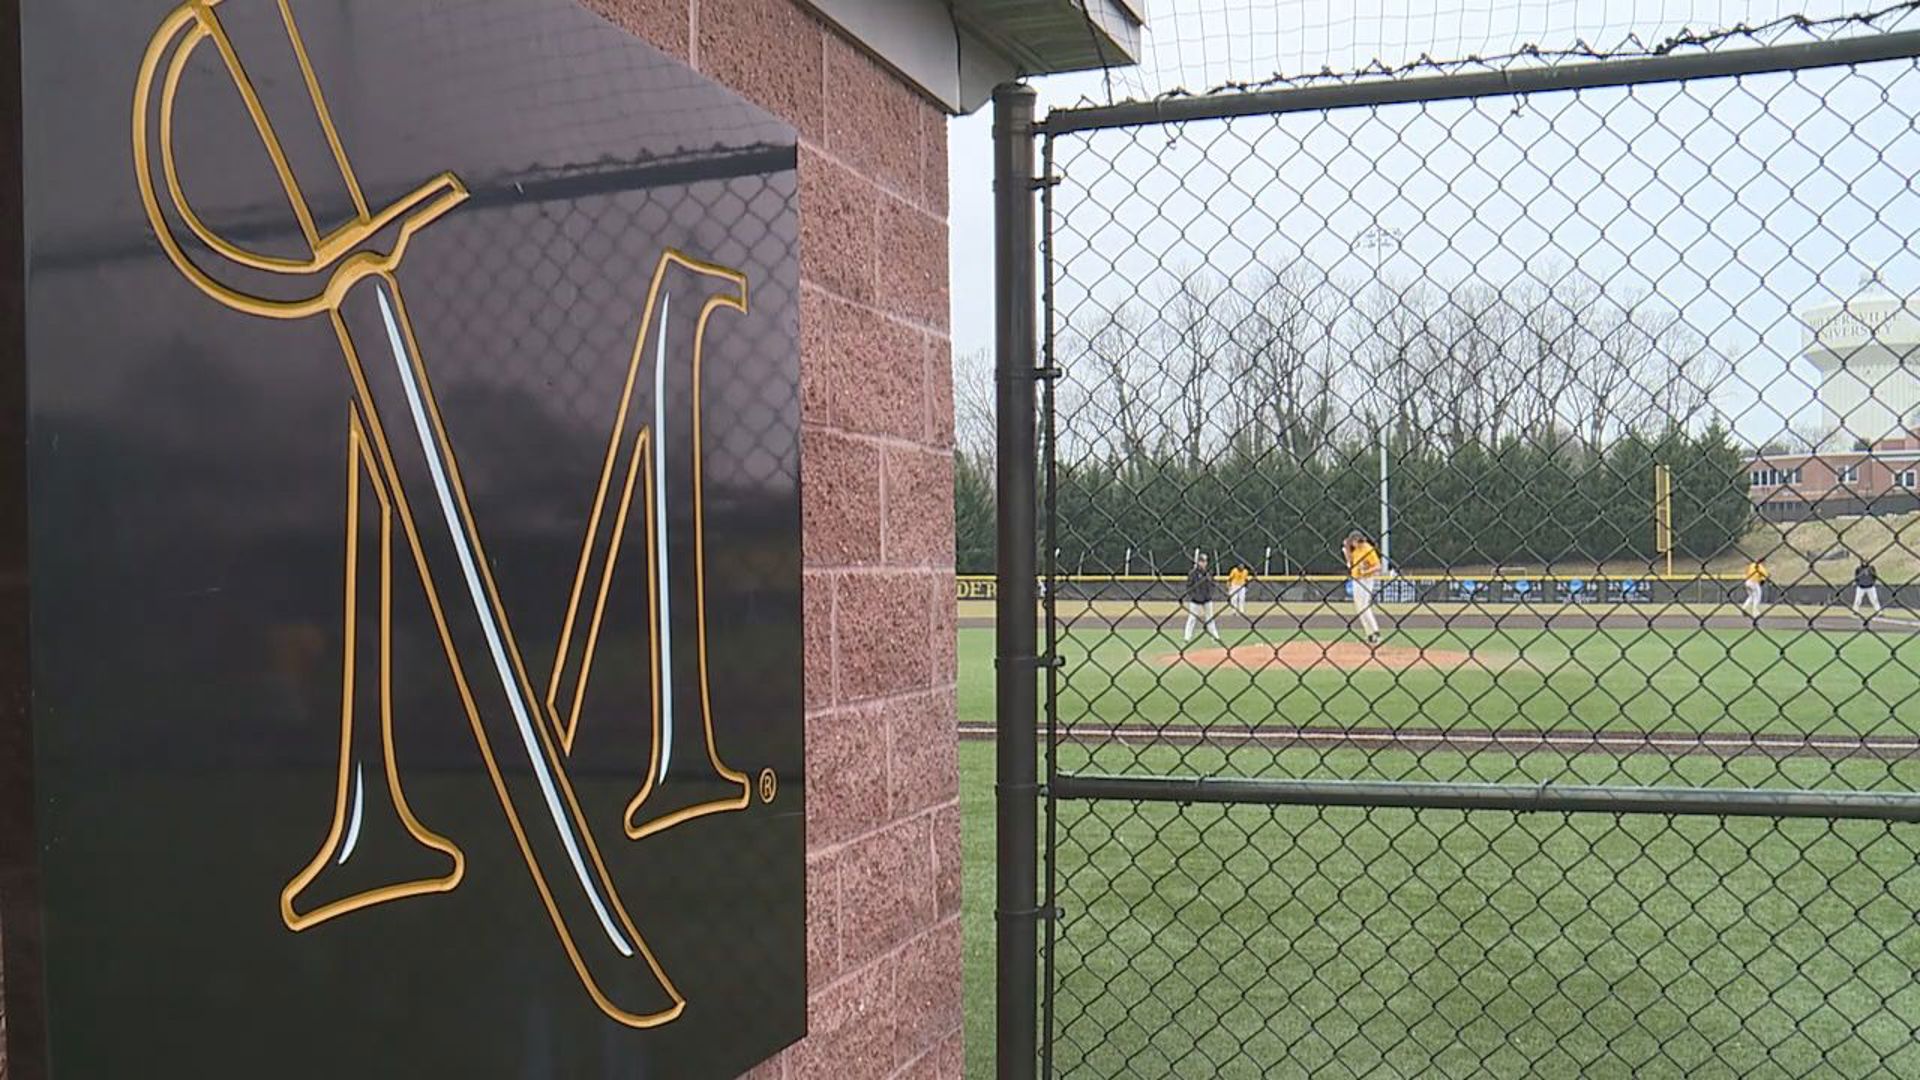 Cooper Park's new lights will allow Millersville baseball to play its first evening games and expand use by the surrounding baseball community.